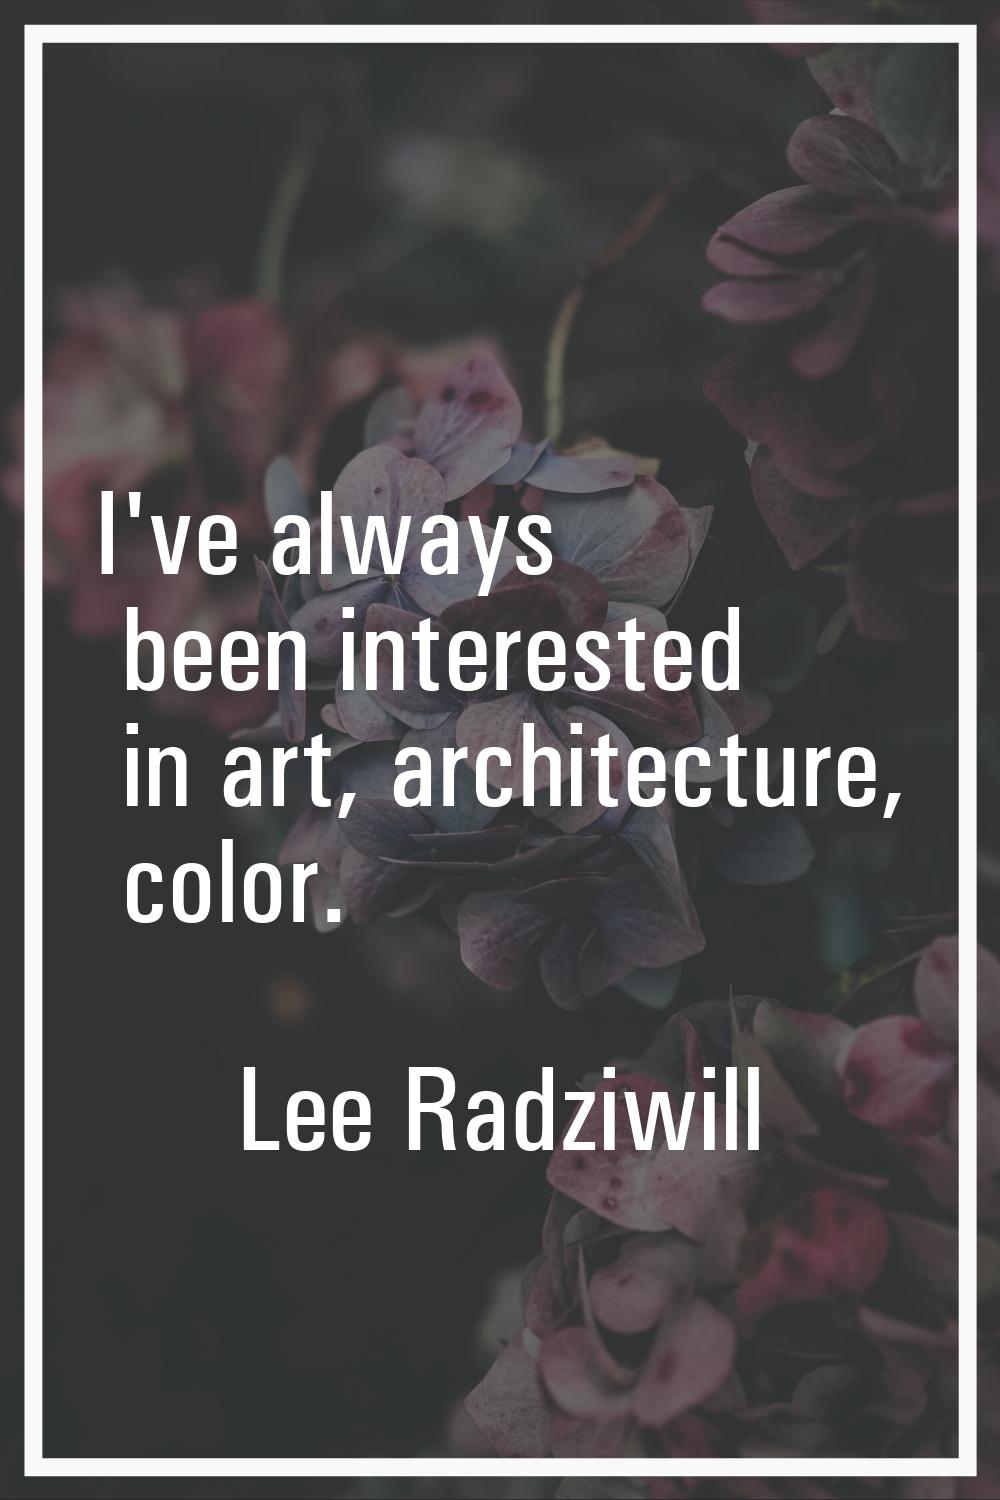 I've always been interested in art, architecture, color.